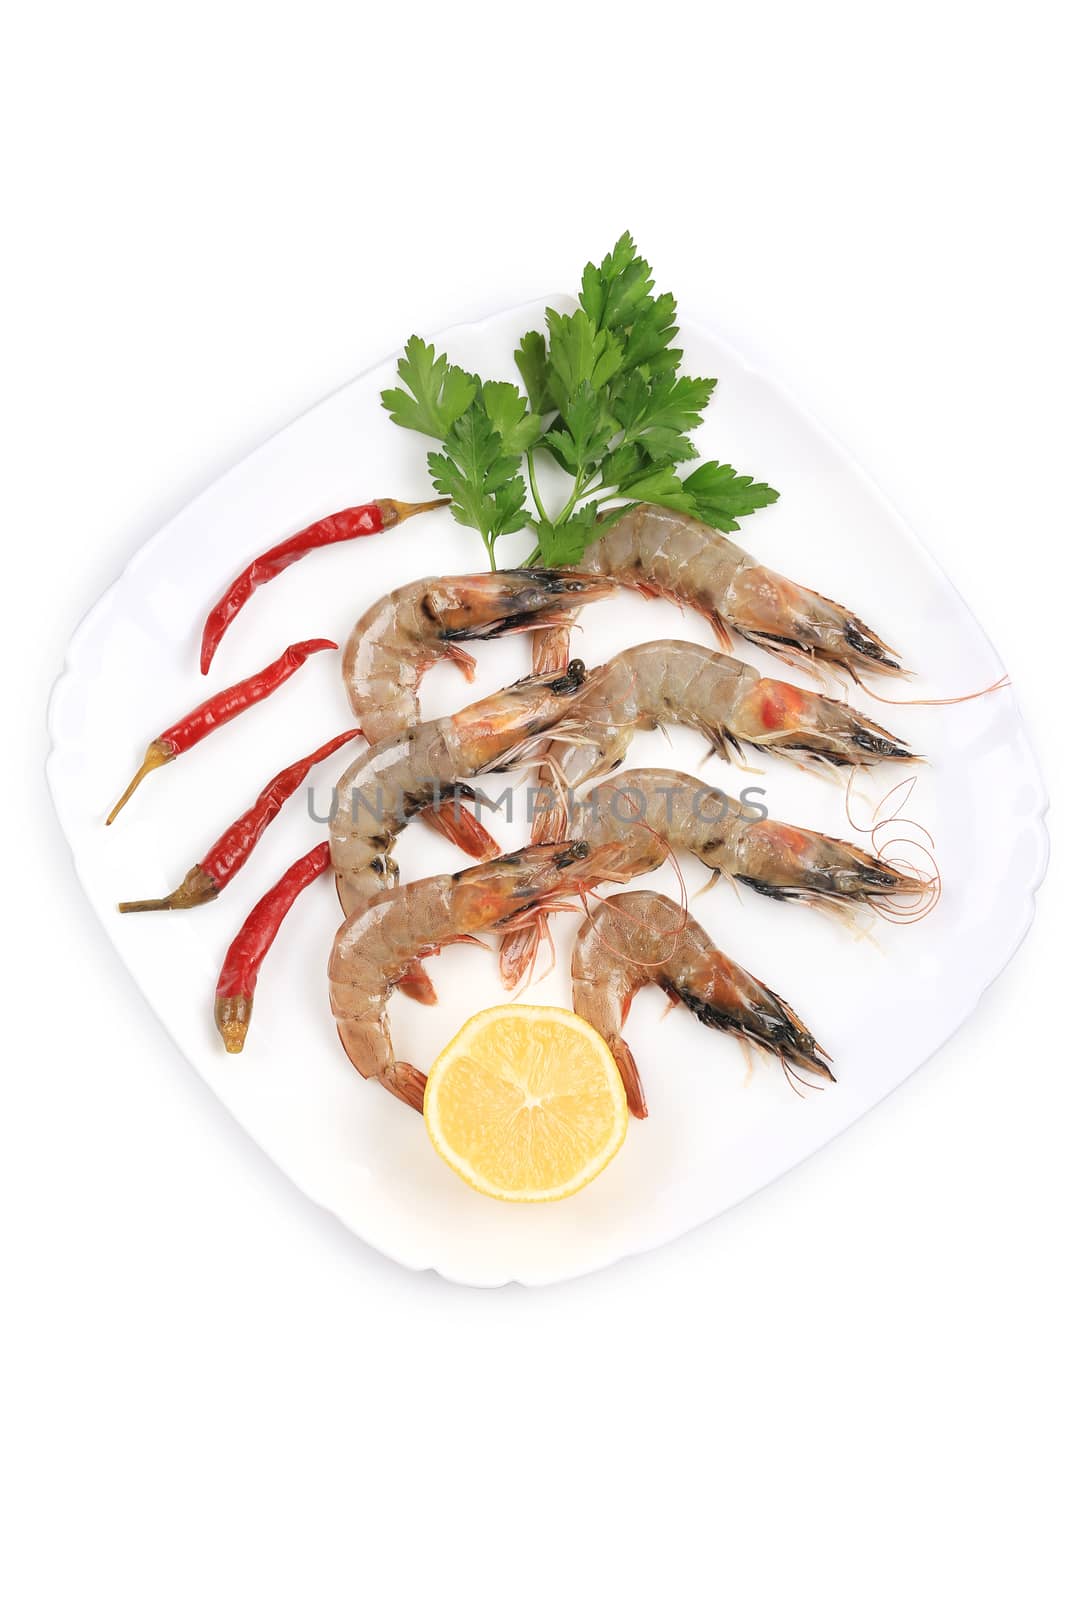 Fresh shrimps on plate with pepper. Isolated on a white background.